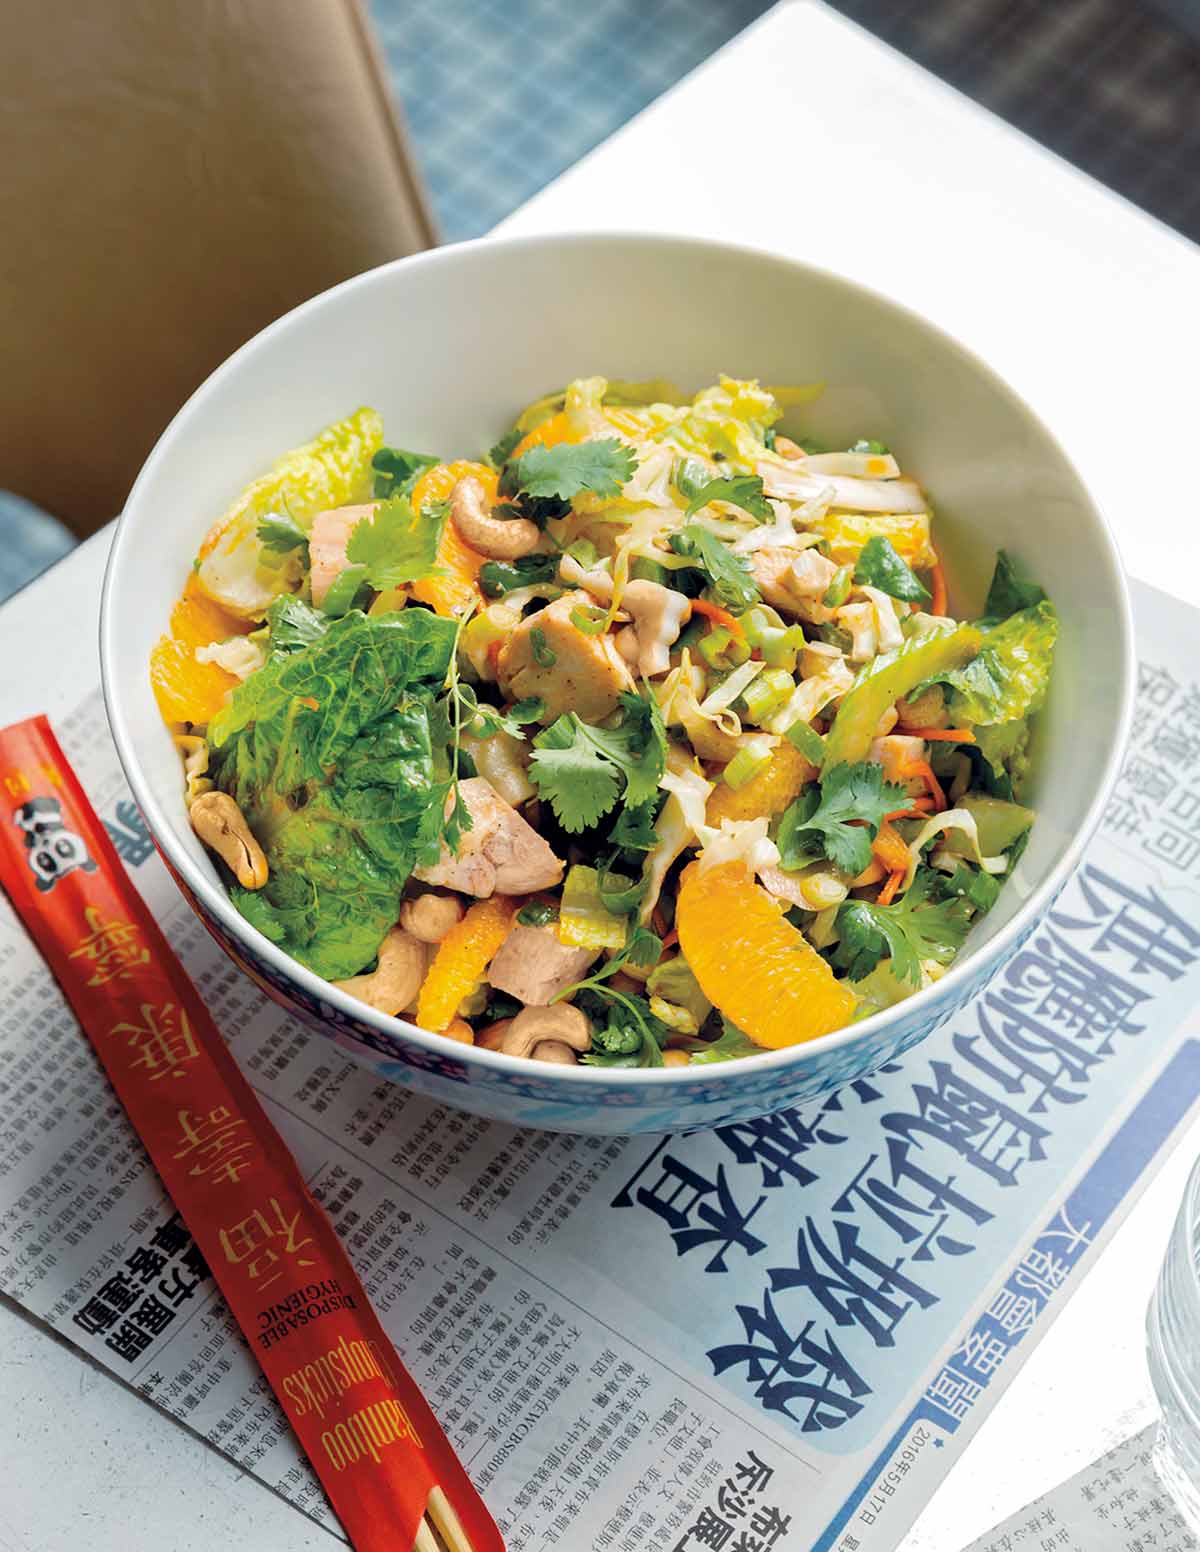 A bowl filled with greens, chicken, cilantro, and mandarin orange segments with chopsticks on the side